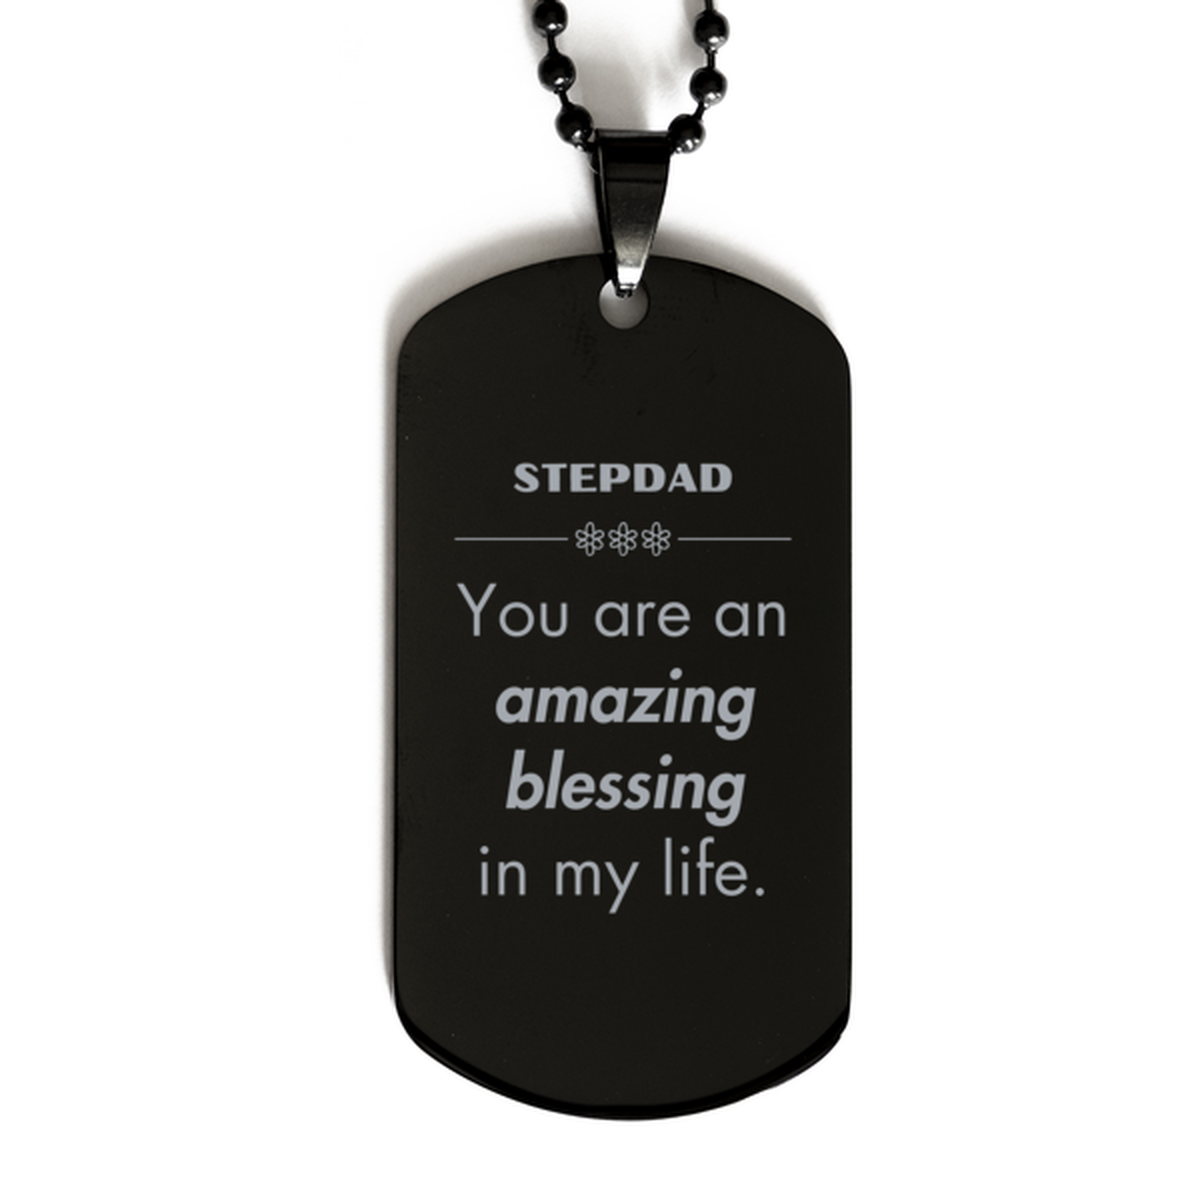 Stepdad Black Dog Tag, You are an amazing blessing in my life, Thank You Gifts For Stepdad, Inspirational Birthday Christmas Unique Gifts For Stepdad